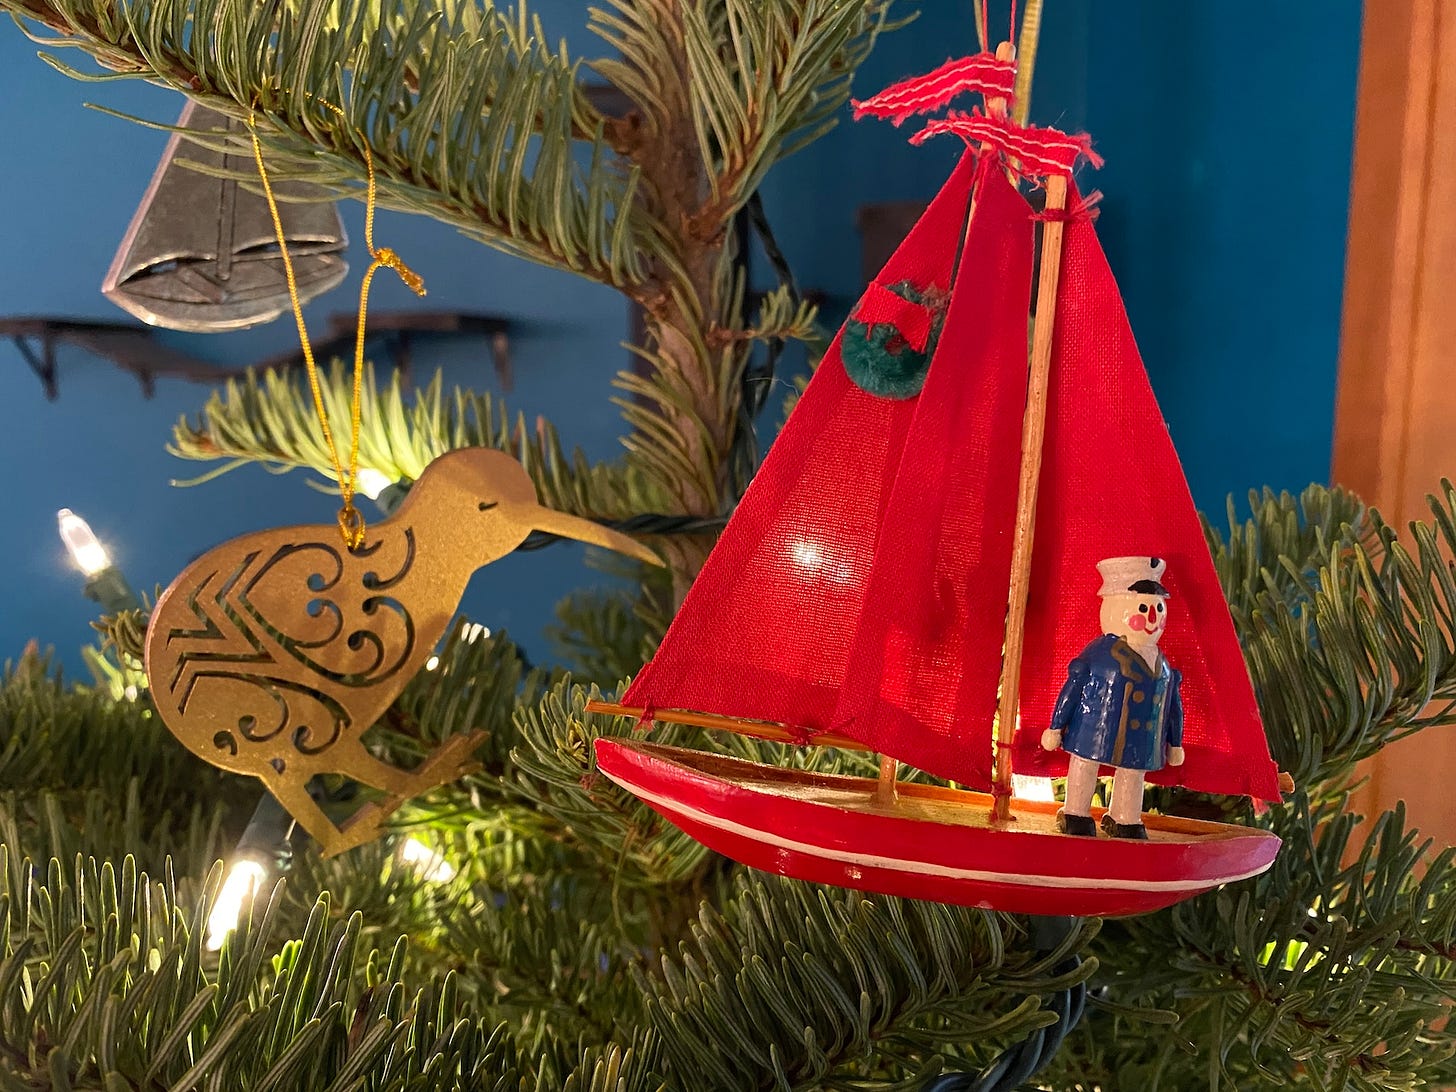 Very close up photo of a Christmas tree with a red fabric sailboat ornament and a carved kiwi bird ornament